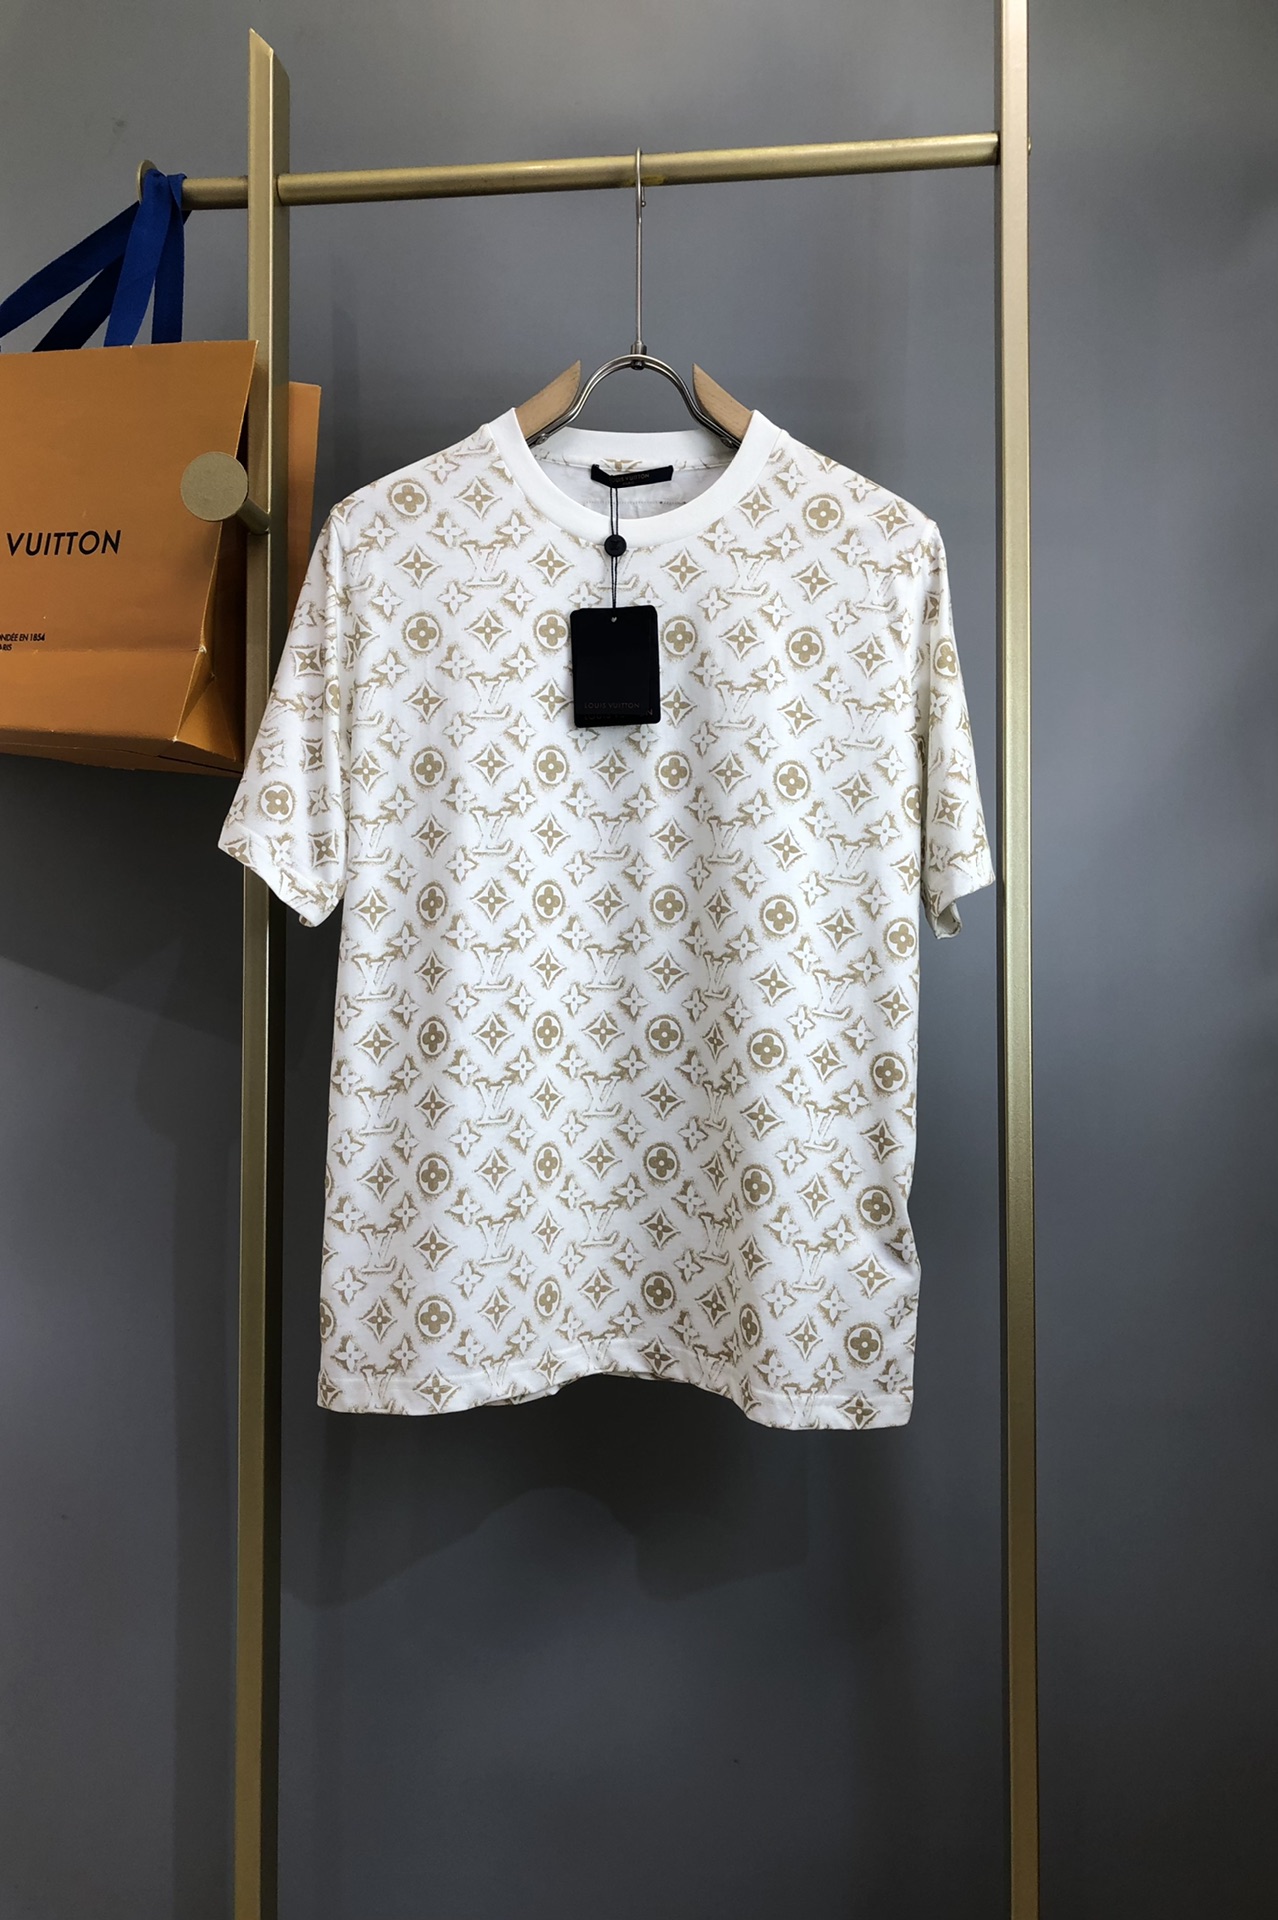 Louis Vuitton Clothing T-Shirt Cotton Knitting Summer Collection